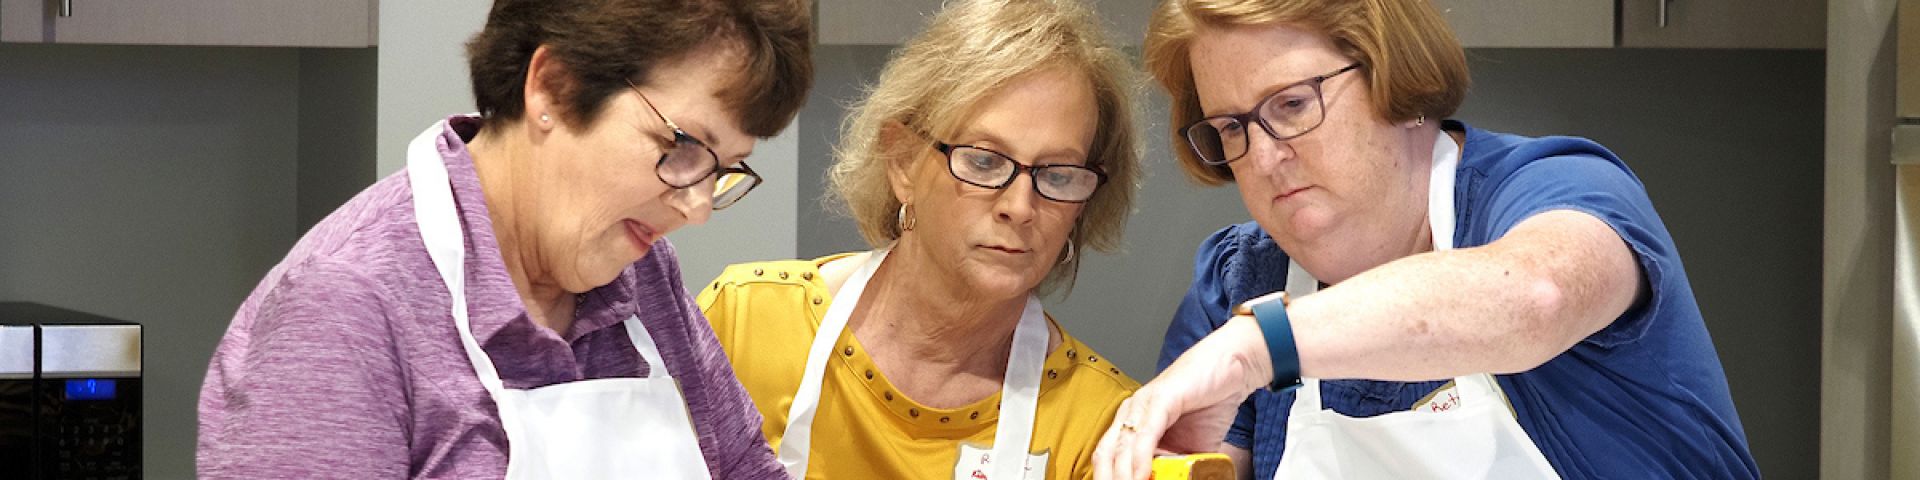 Summer classes released for USA Health teaching kitchens